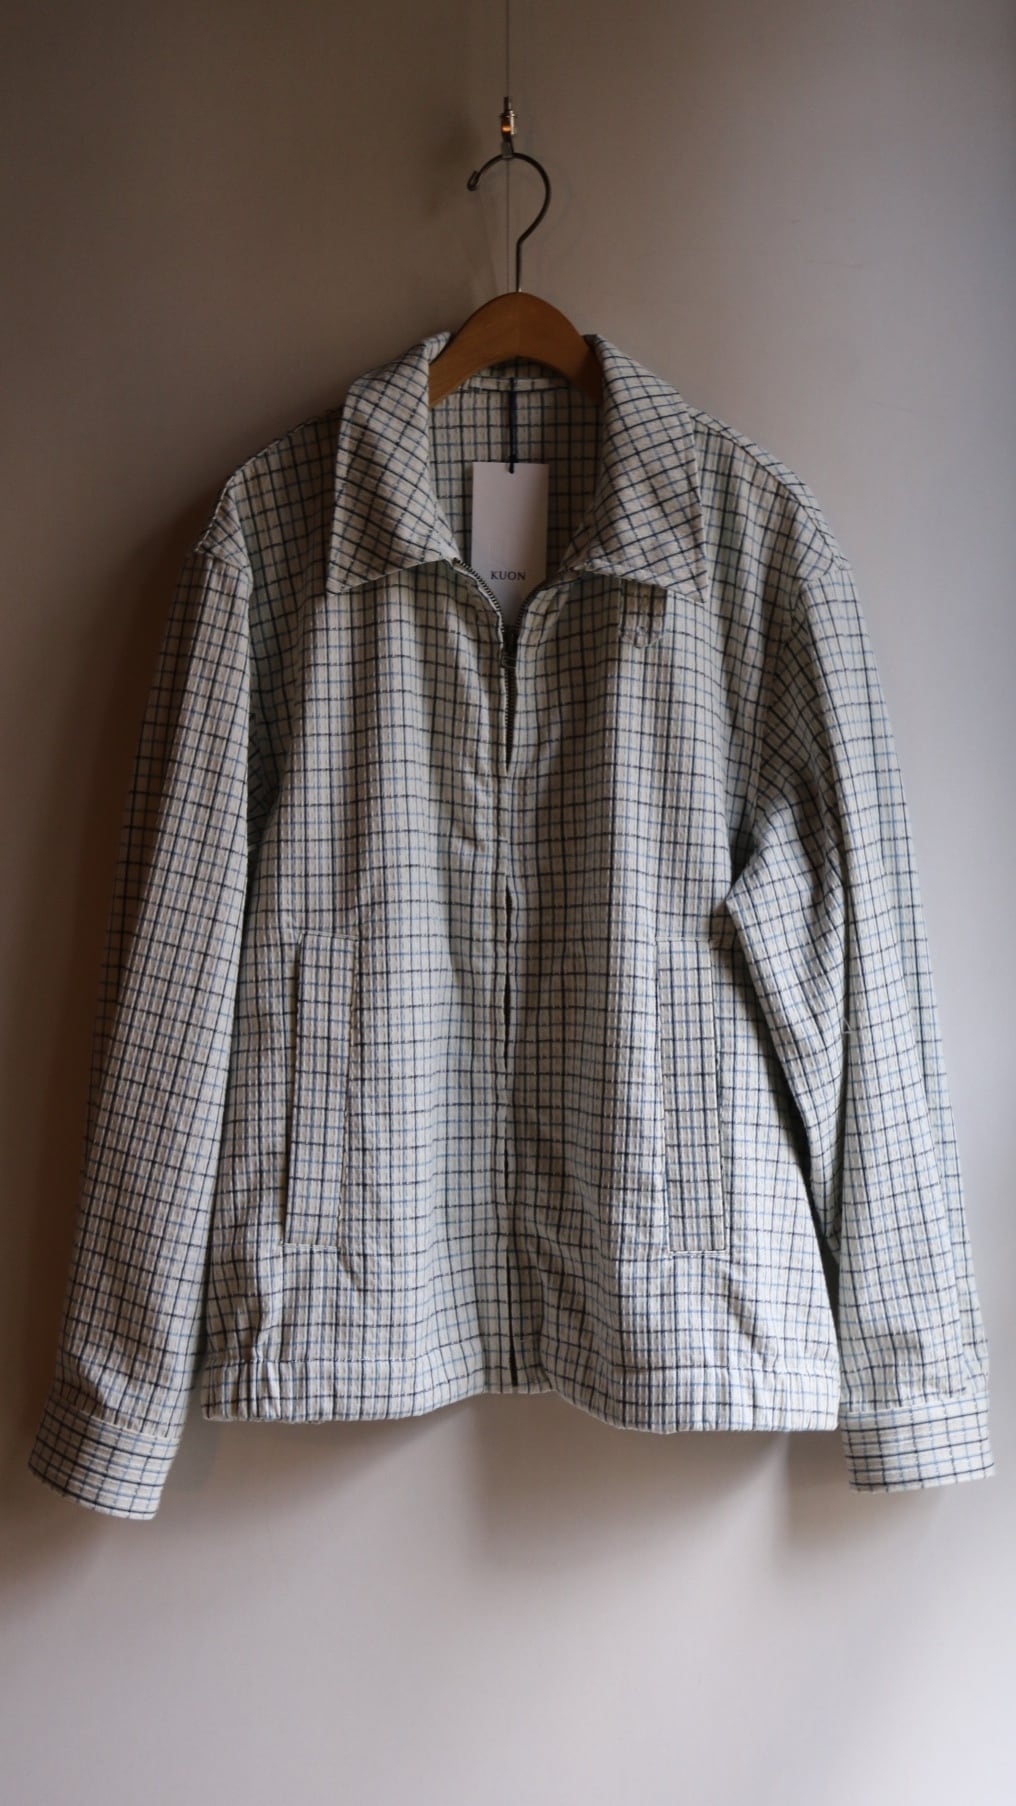 KUON/クオン shirts #2001-SH03 吉野格子 brown check | Routes*Roots